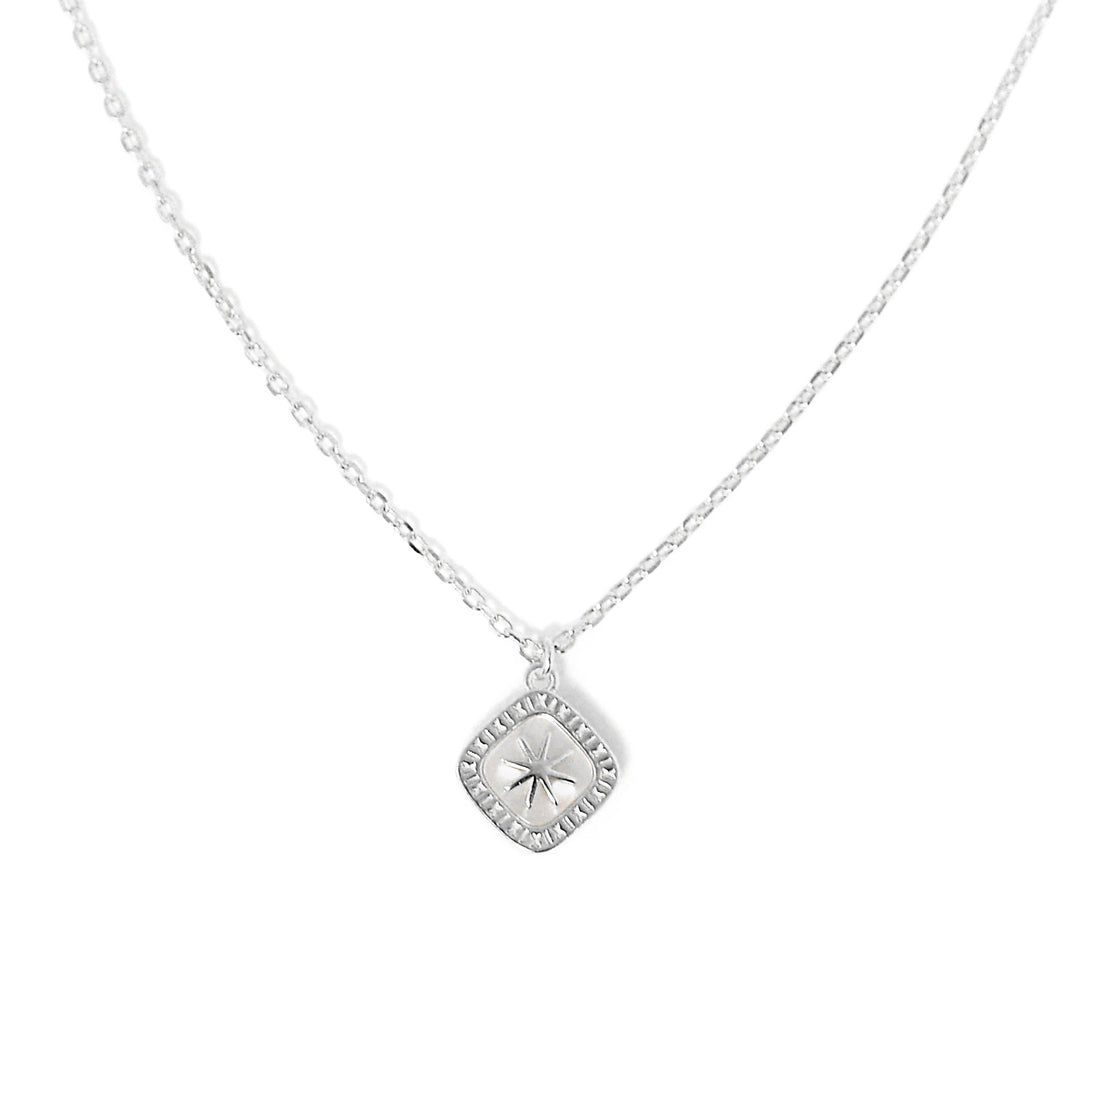 Dolce Mondo Silver 925 Necklace with Squared Star Mother of Pearl Pendant and Sparkling Cubic Zirconia for Ladies